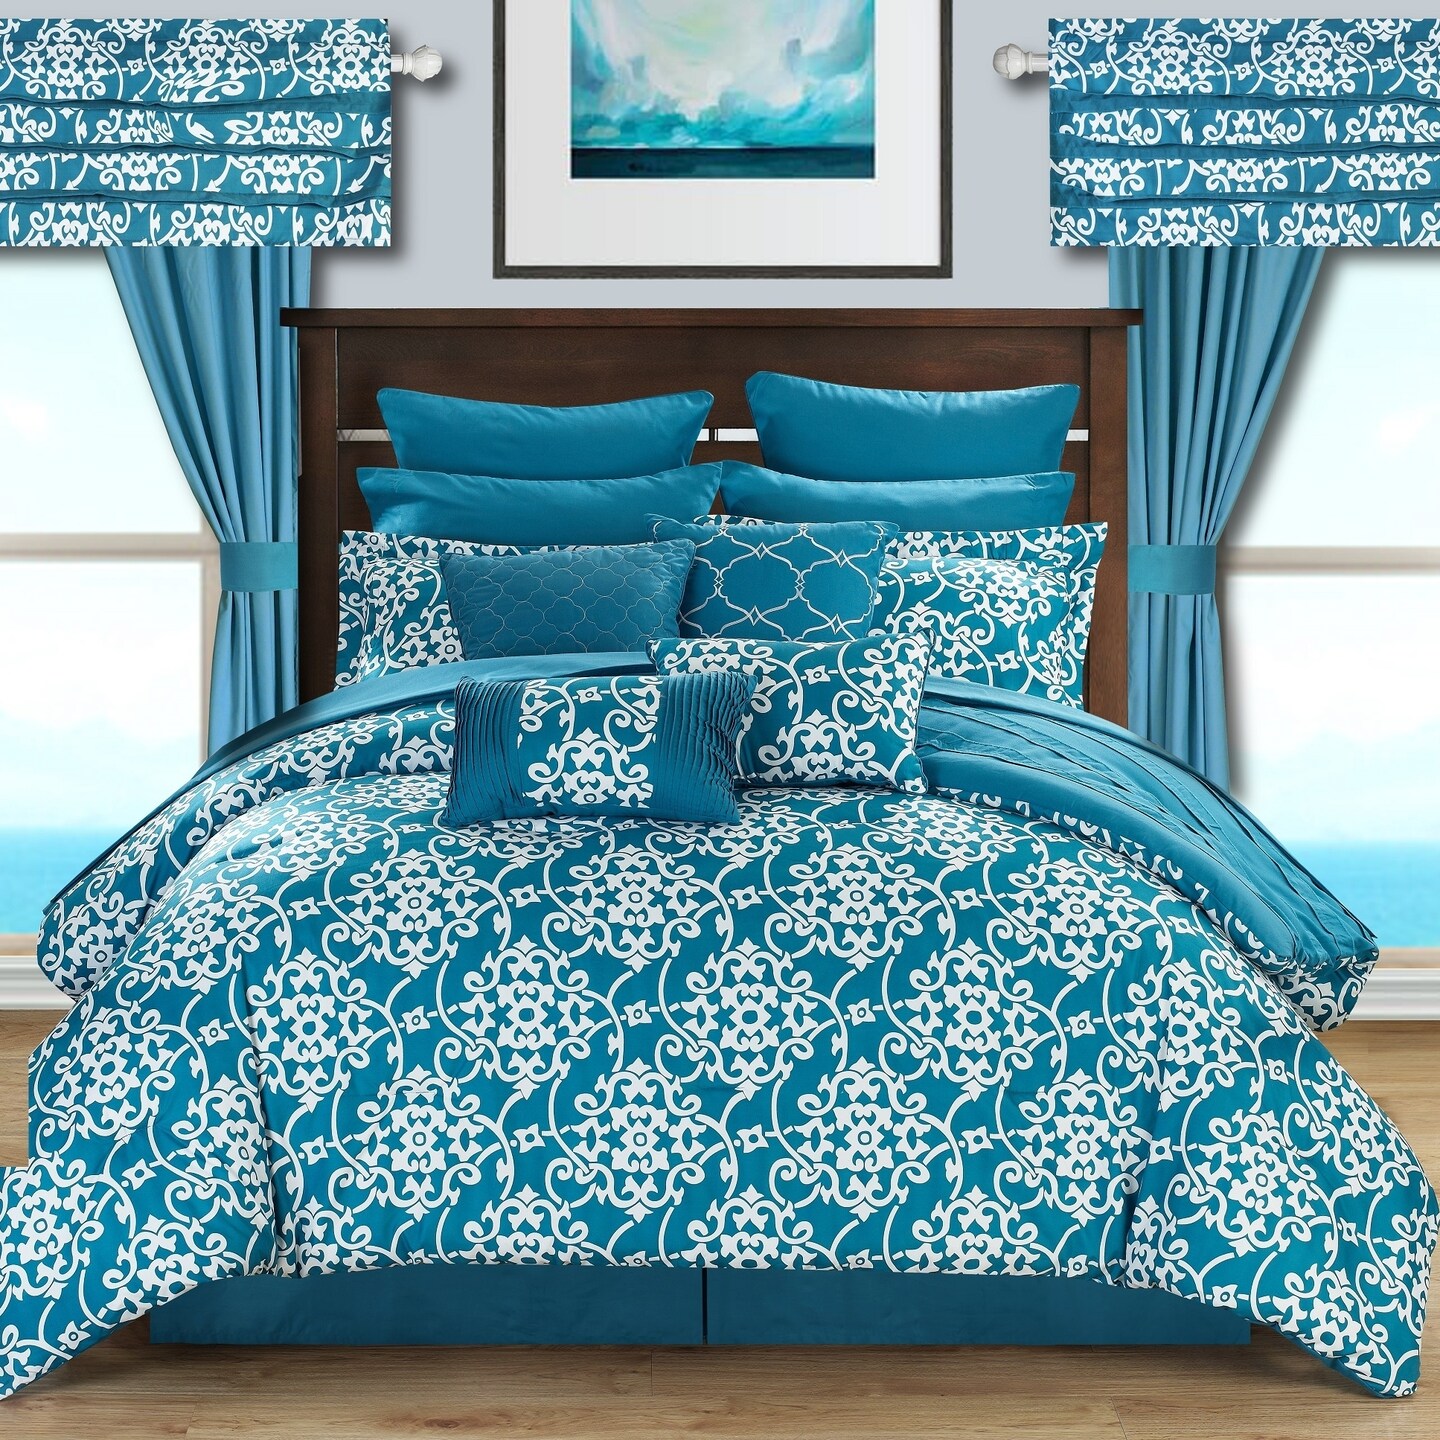 Chic Home 24 Piece Hailee Reversible Printed 2-in-1 look Comforter Set includes Sheets